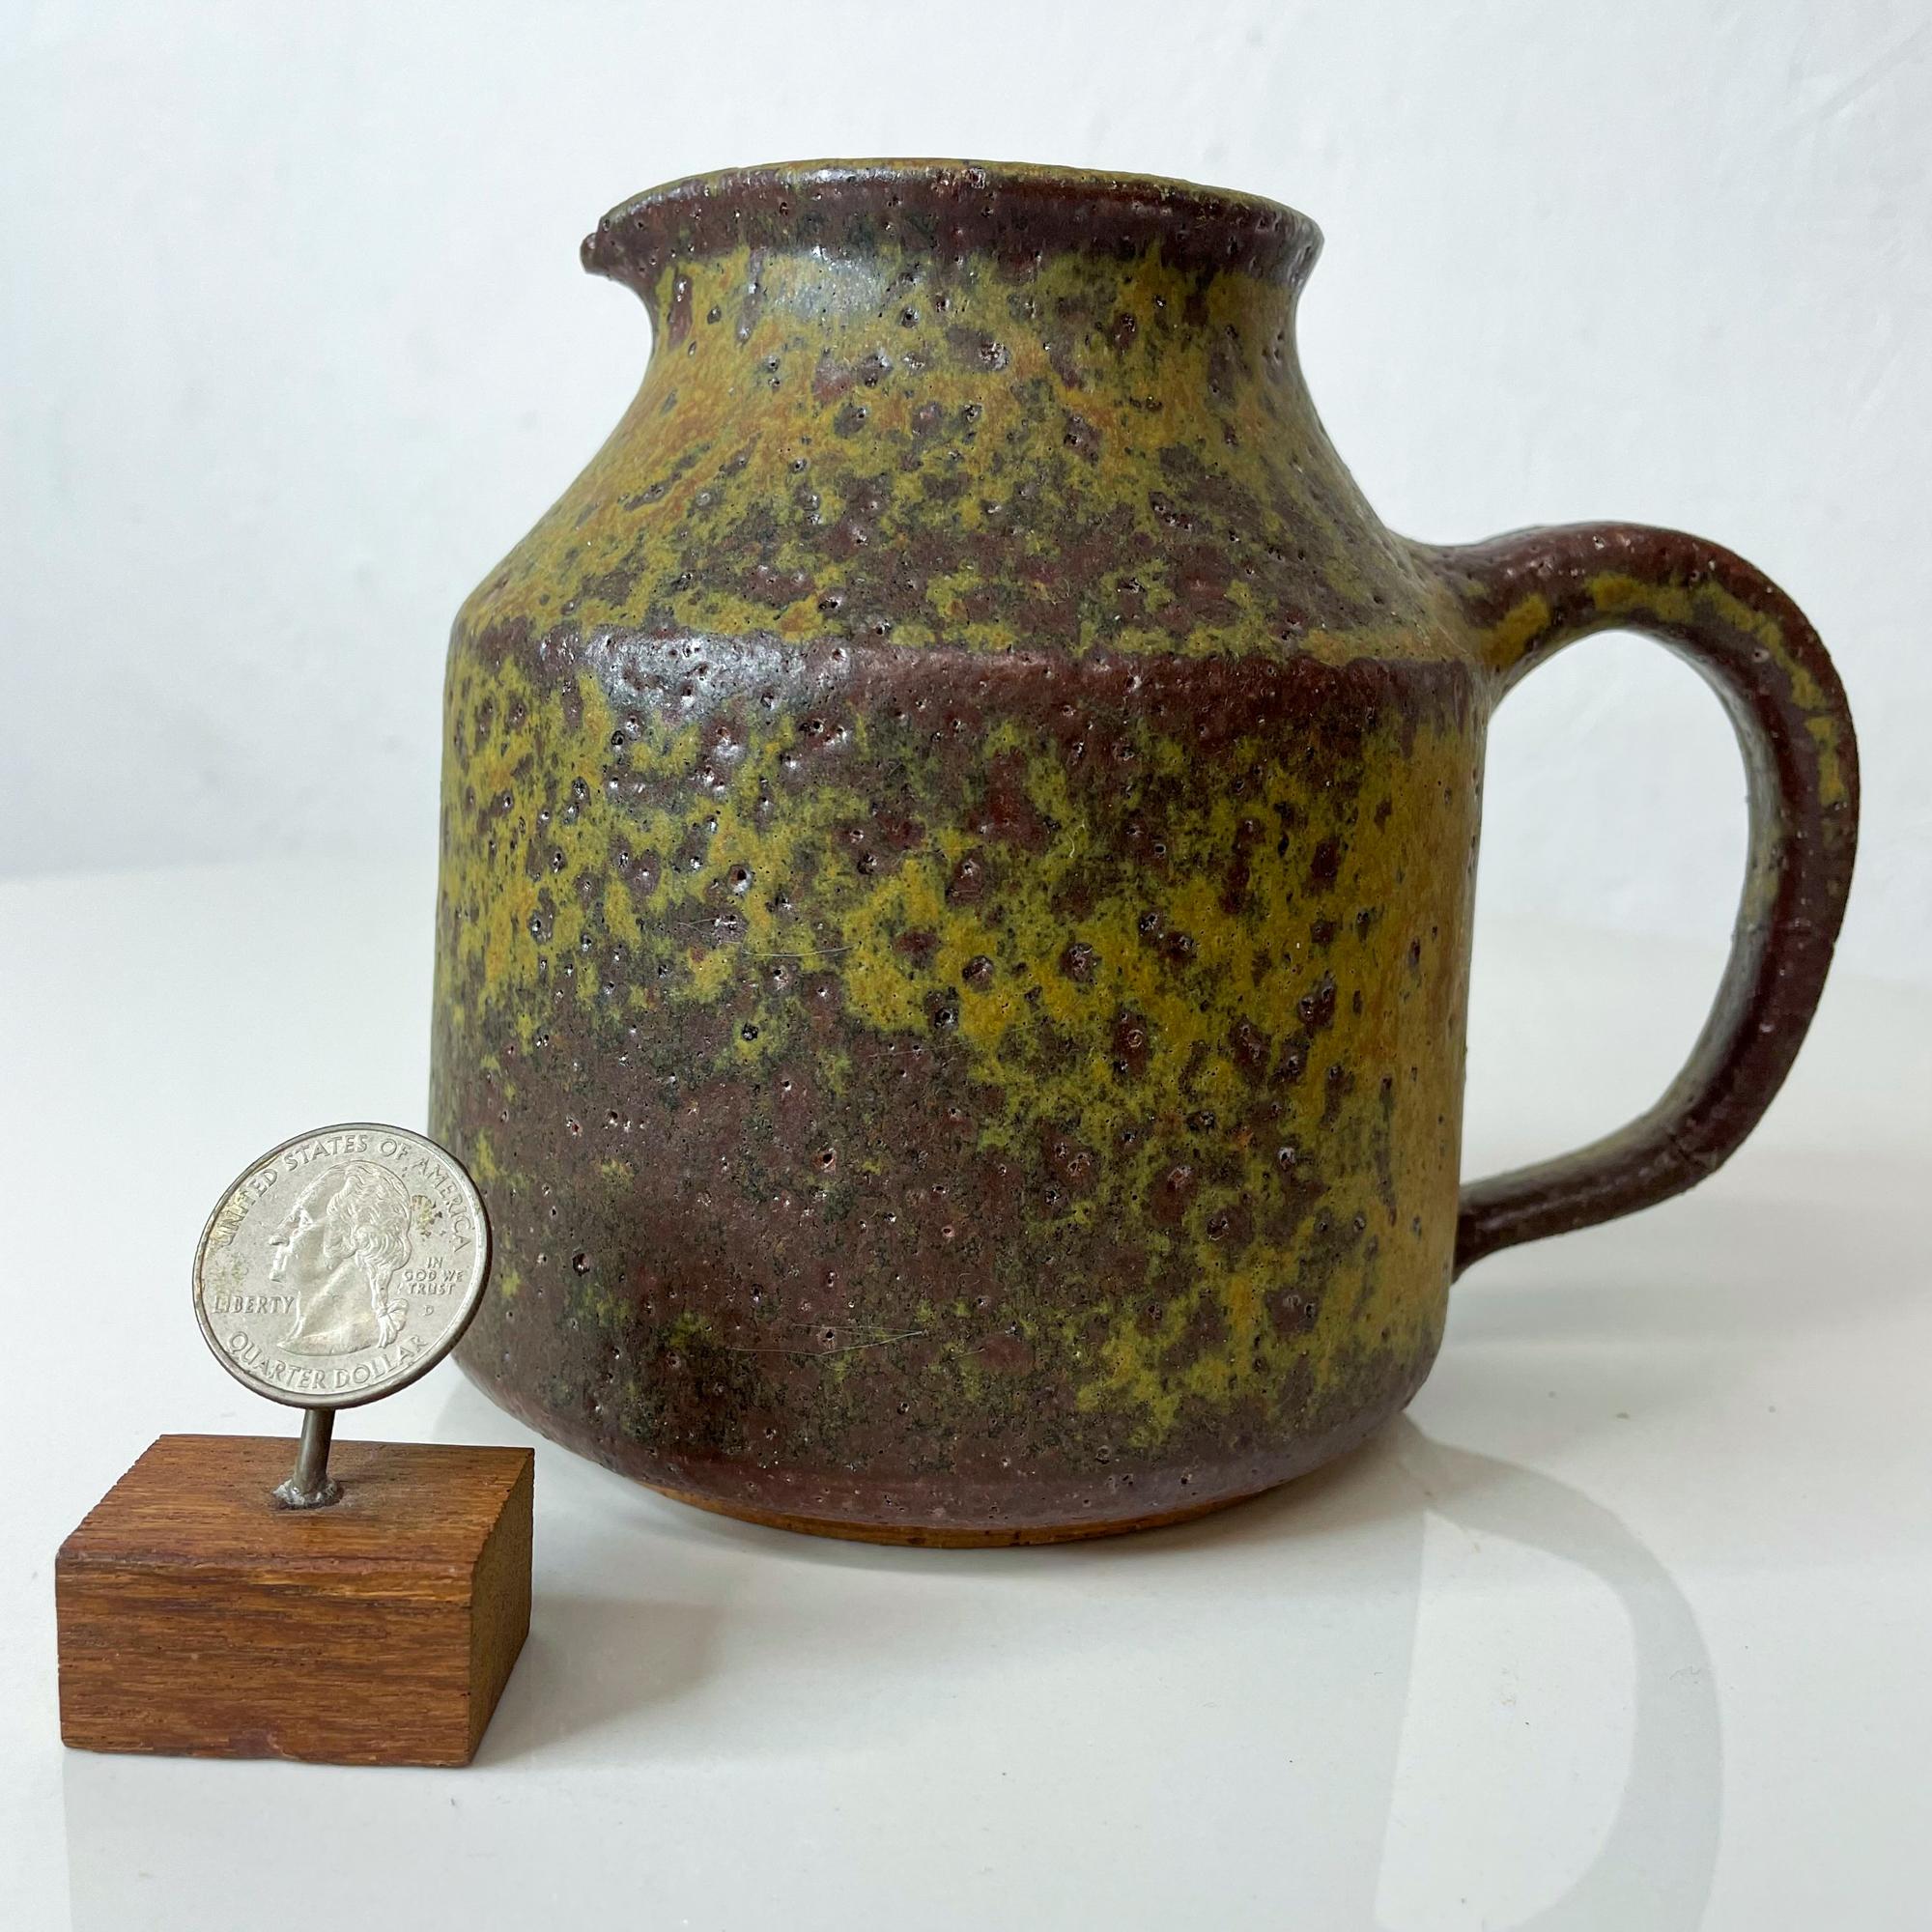 Mid-Century Modern muted yellow and brown glazed pottery jug after designs of Doyle Lane USA 1960s
In crackling topography wonderful textured appearance.
Artist signed, unclear signature.
Measures: 6.25 D x 4.75 H x 5.25W diameter inches
Refer